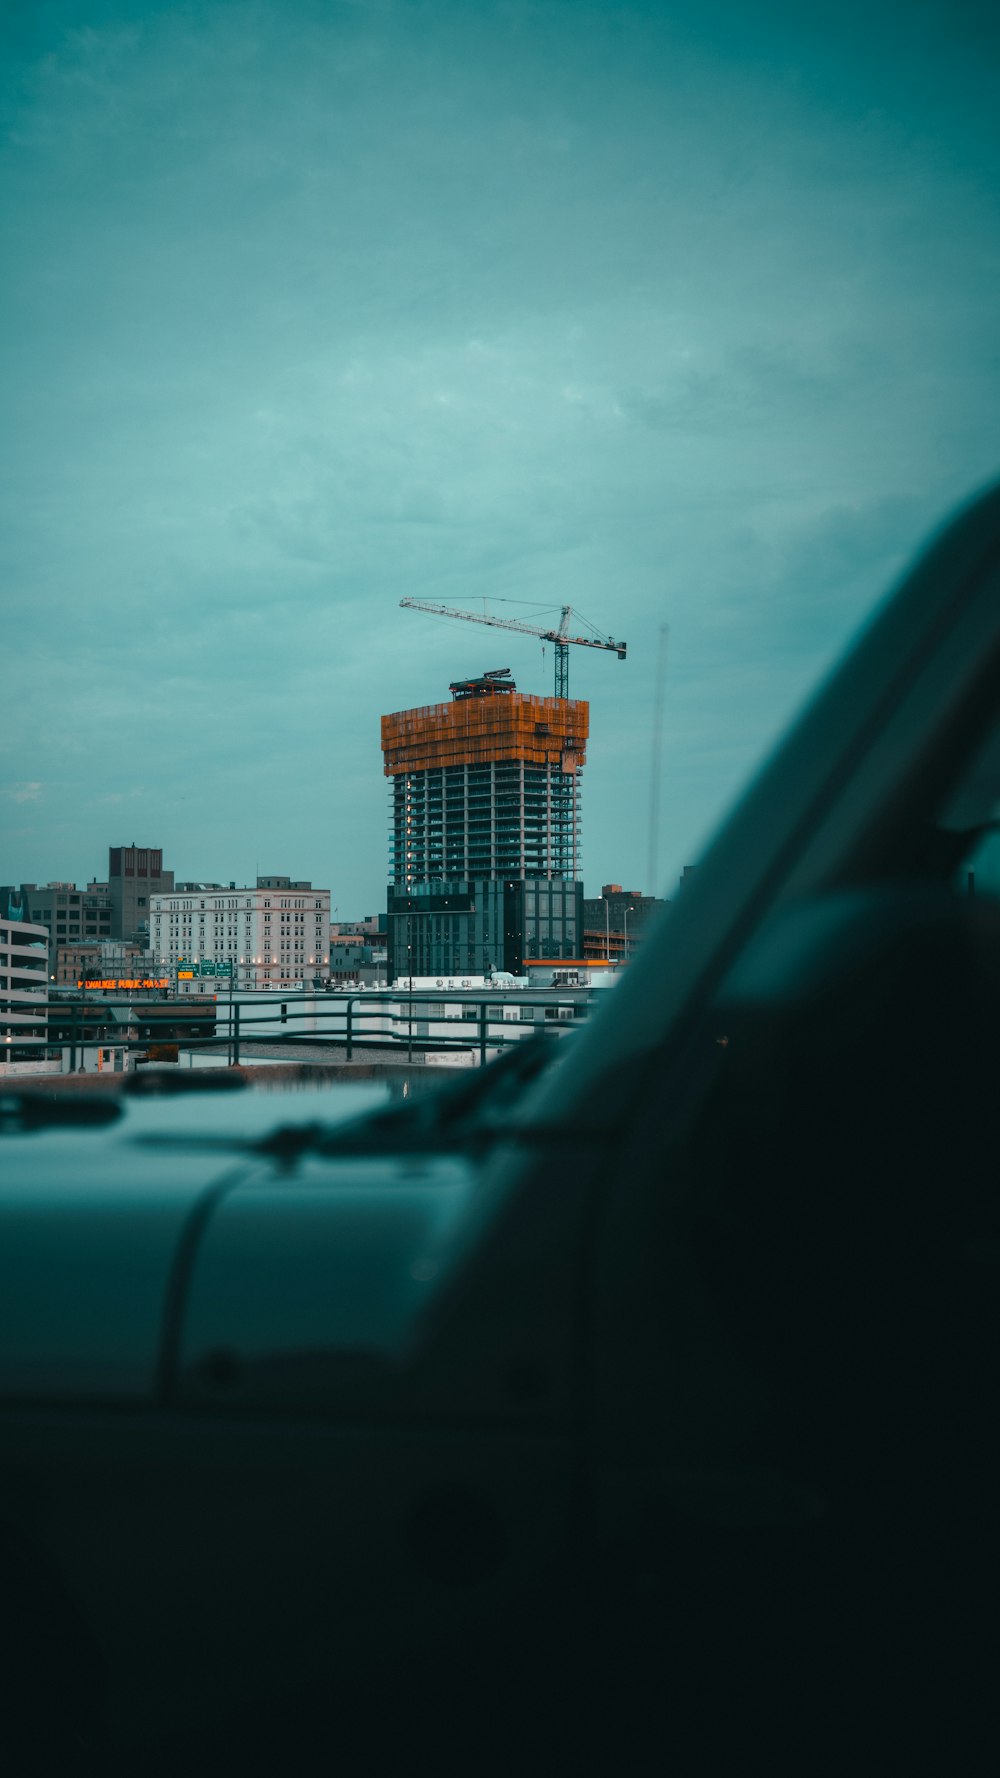 a car parked in front of a building under construction